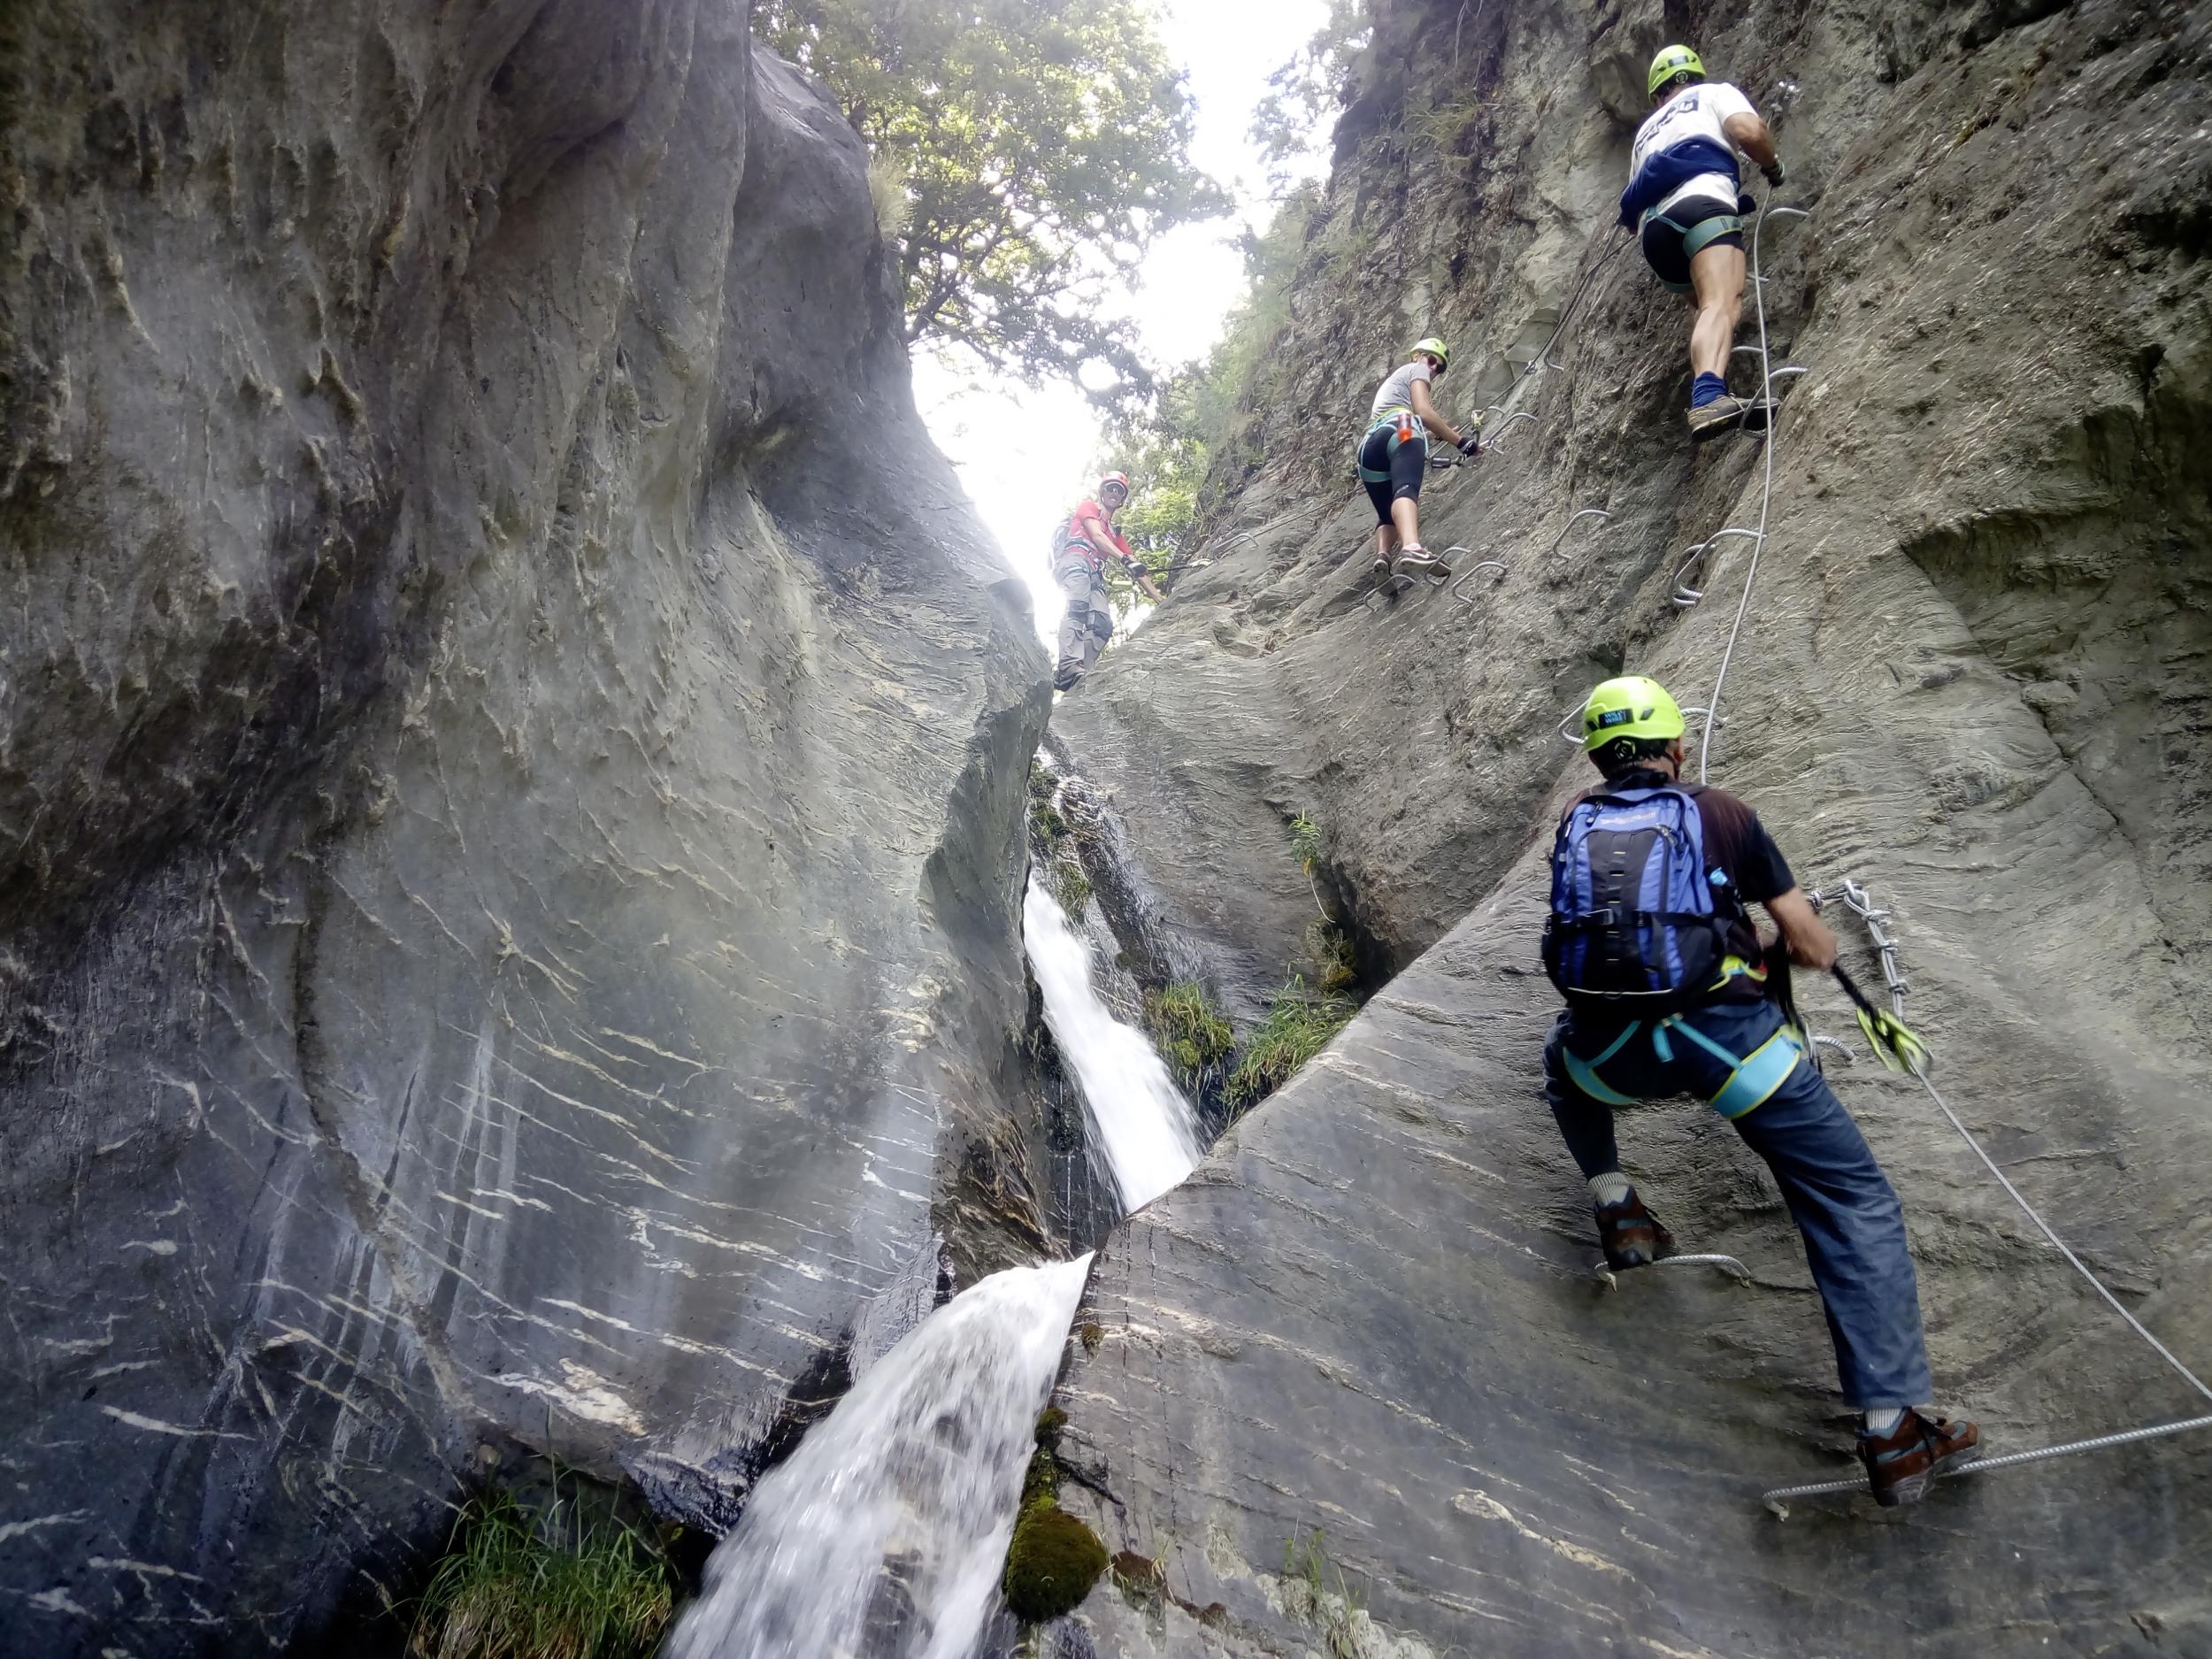 The only way is up: the via ferrata can be climbed by anyone with a good fitness level